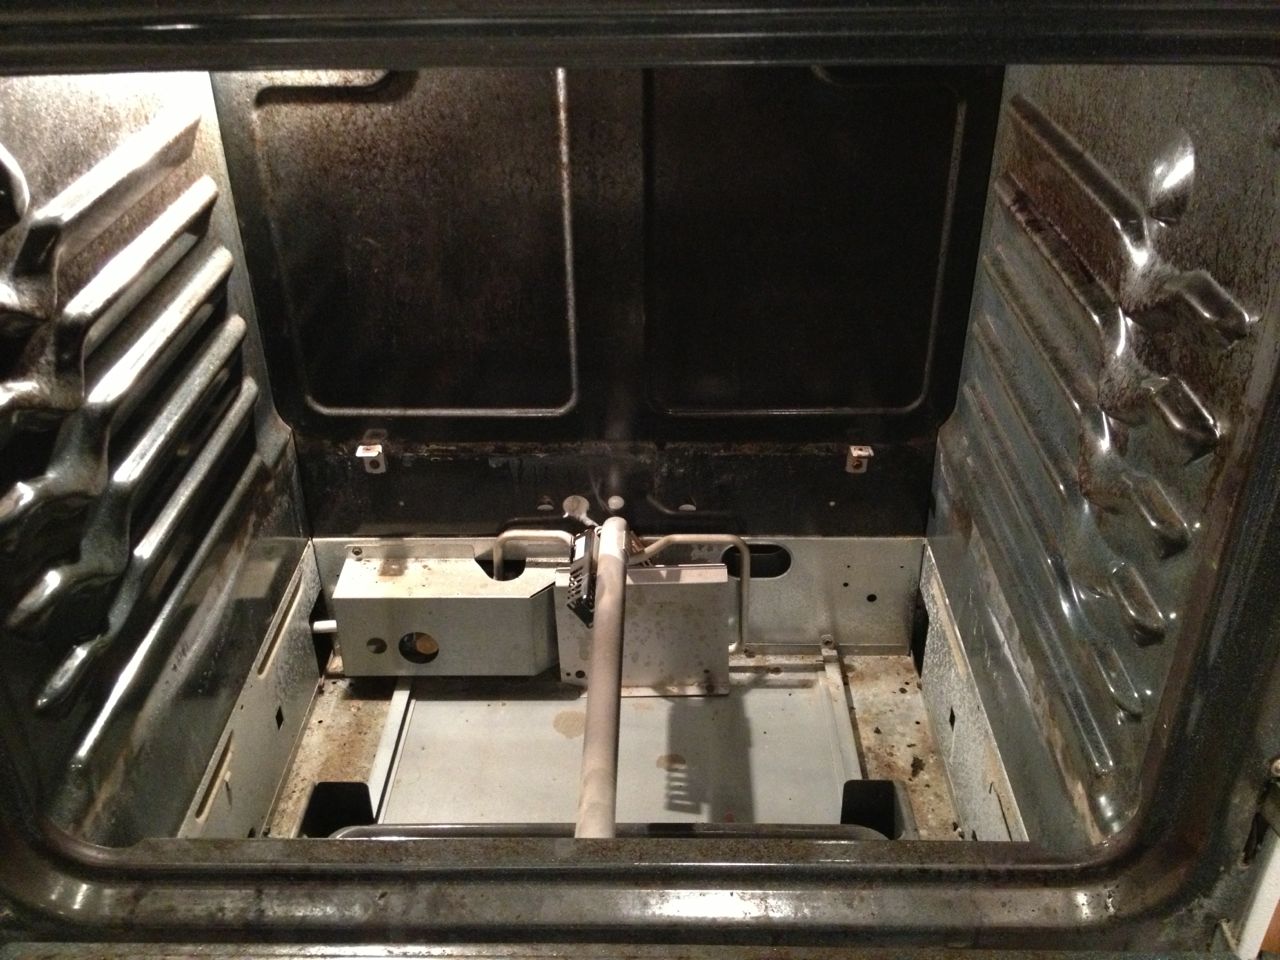 How to Replace the Igniter on a GE XL44 Oven · Share Your Repair